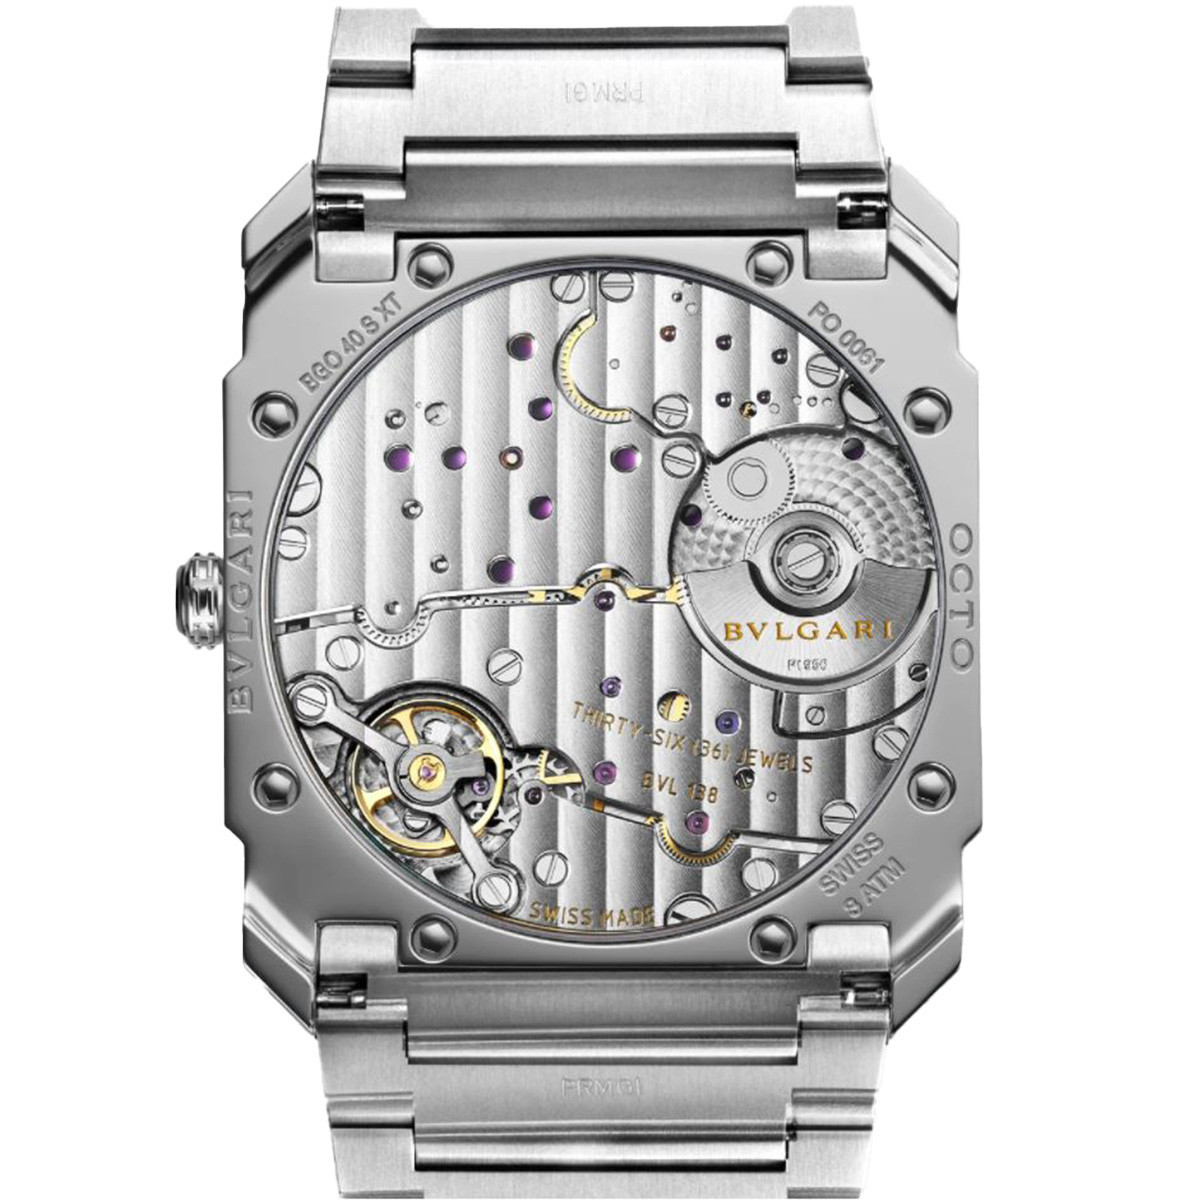 OCTO FINISSIMO WATCH 103464